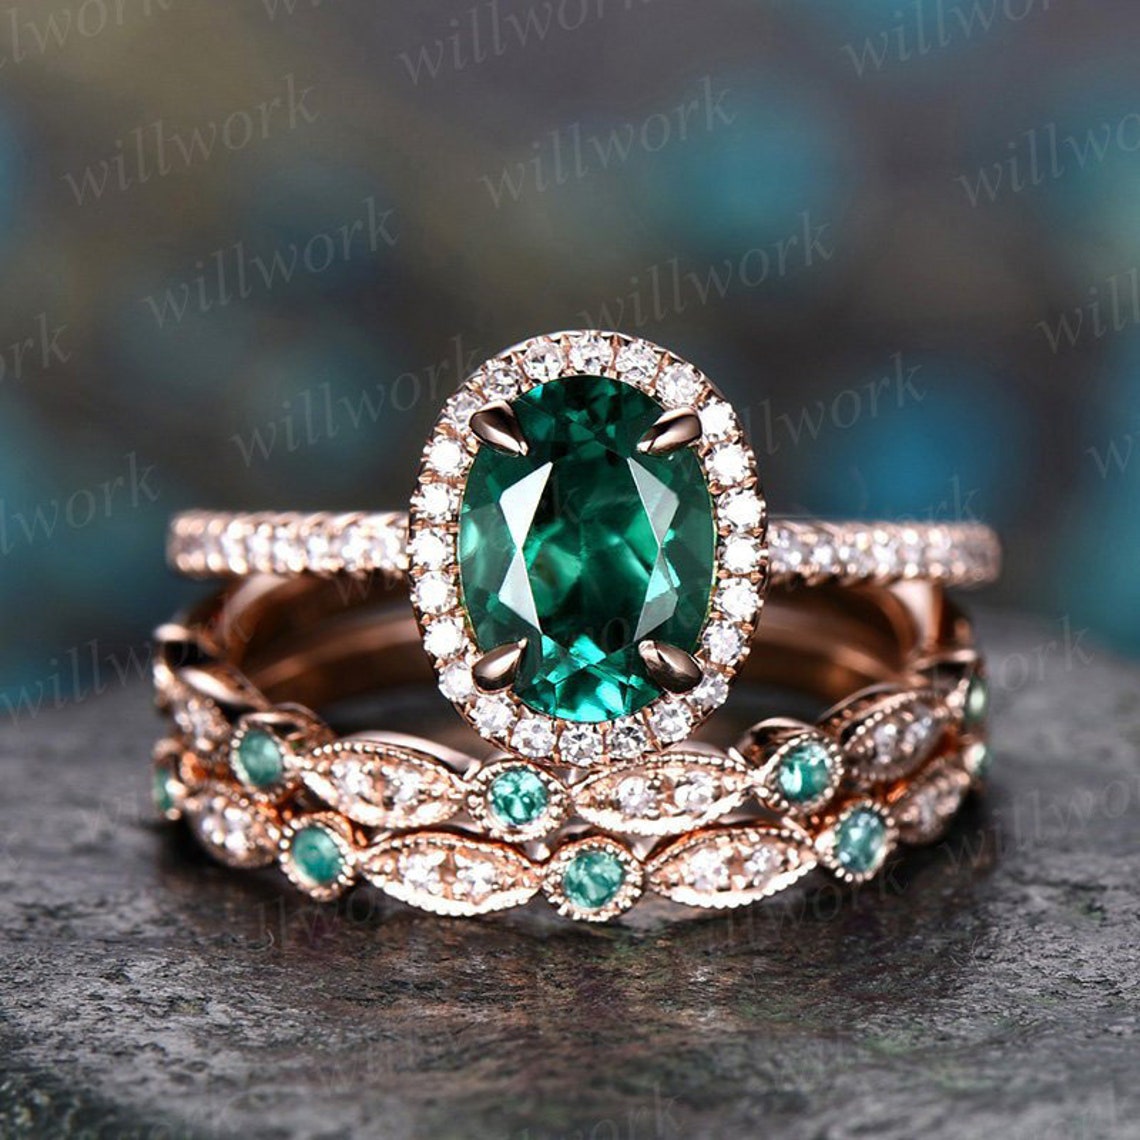 Spring 2023 Release Adds Extraordinary Value To Willwork Jewelry Green Stone Rings